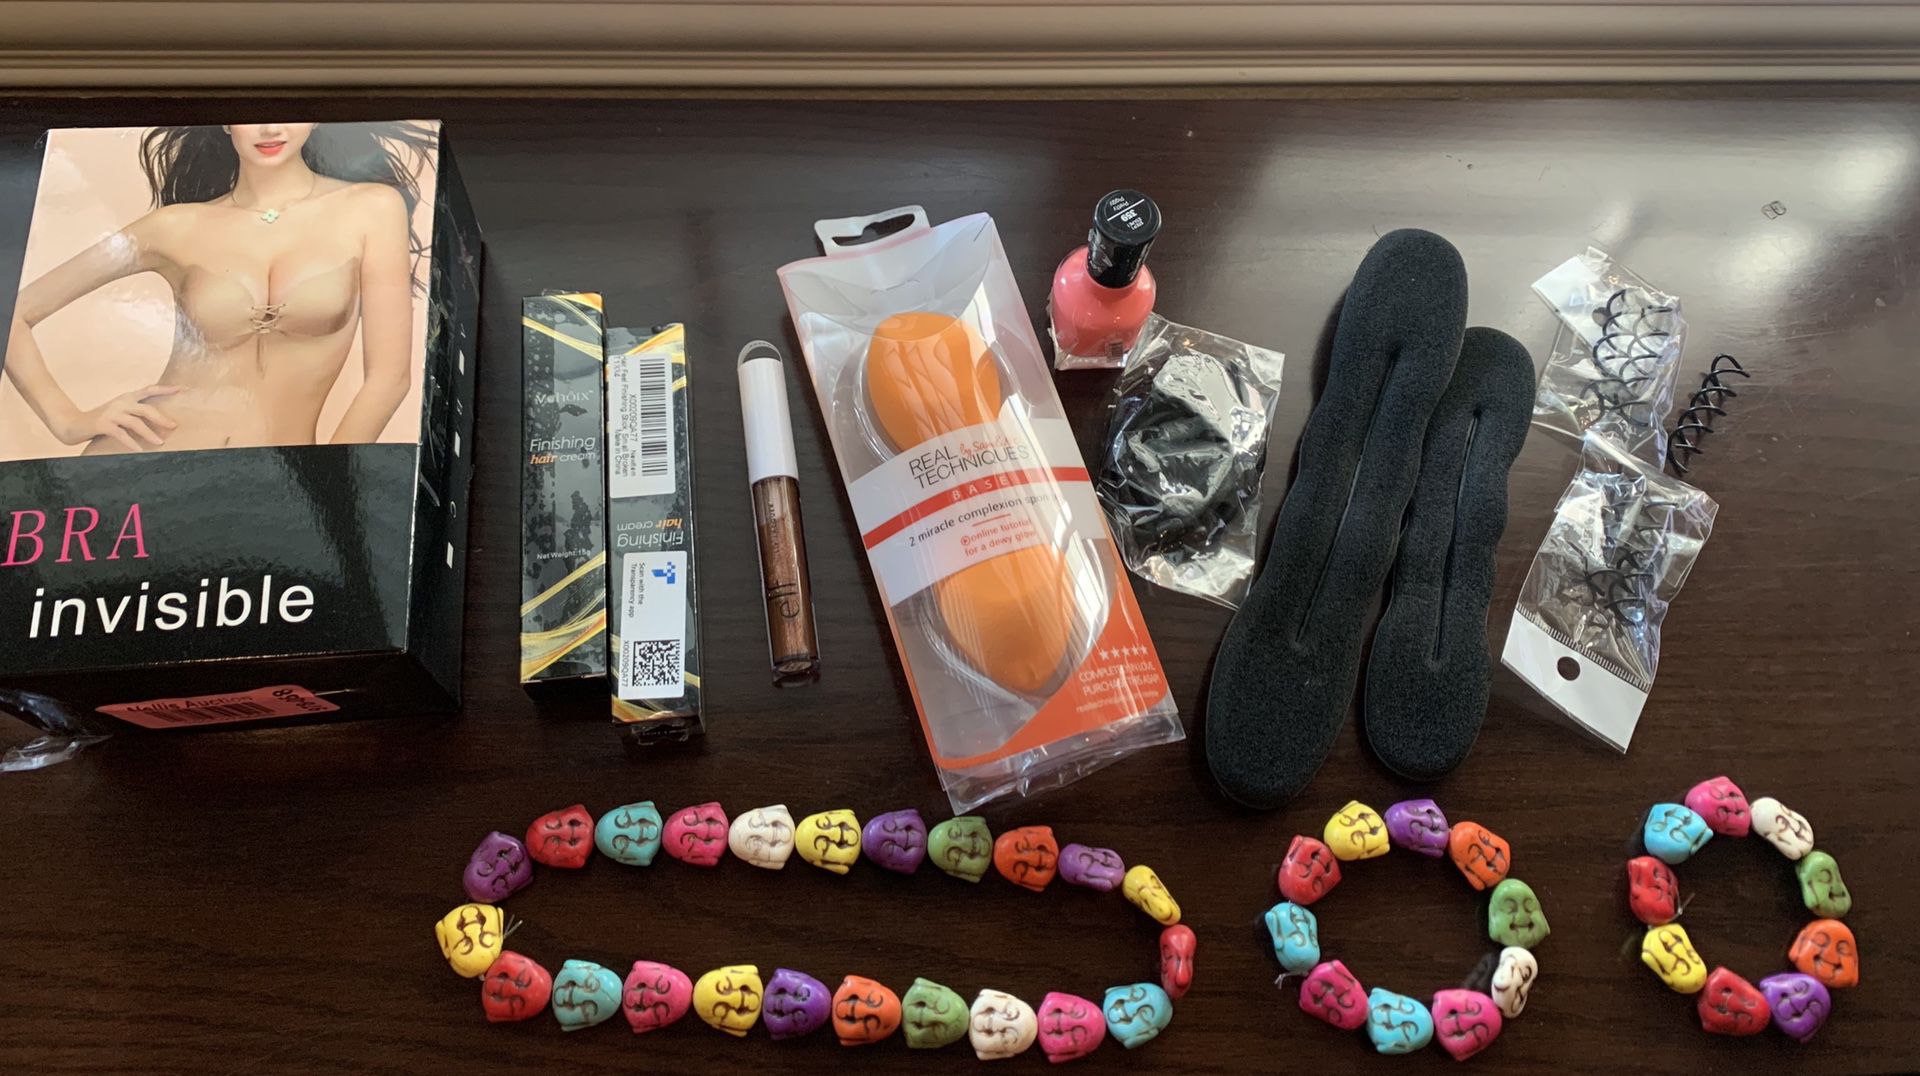 Beauty items, 2 hair finishing creams, hair items, 2 sandals 6.5, 2 invisible bras cup A (beige and black) 2 beauty blender sponges, 1 elf lip gloss,